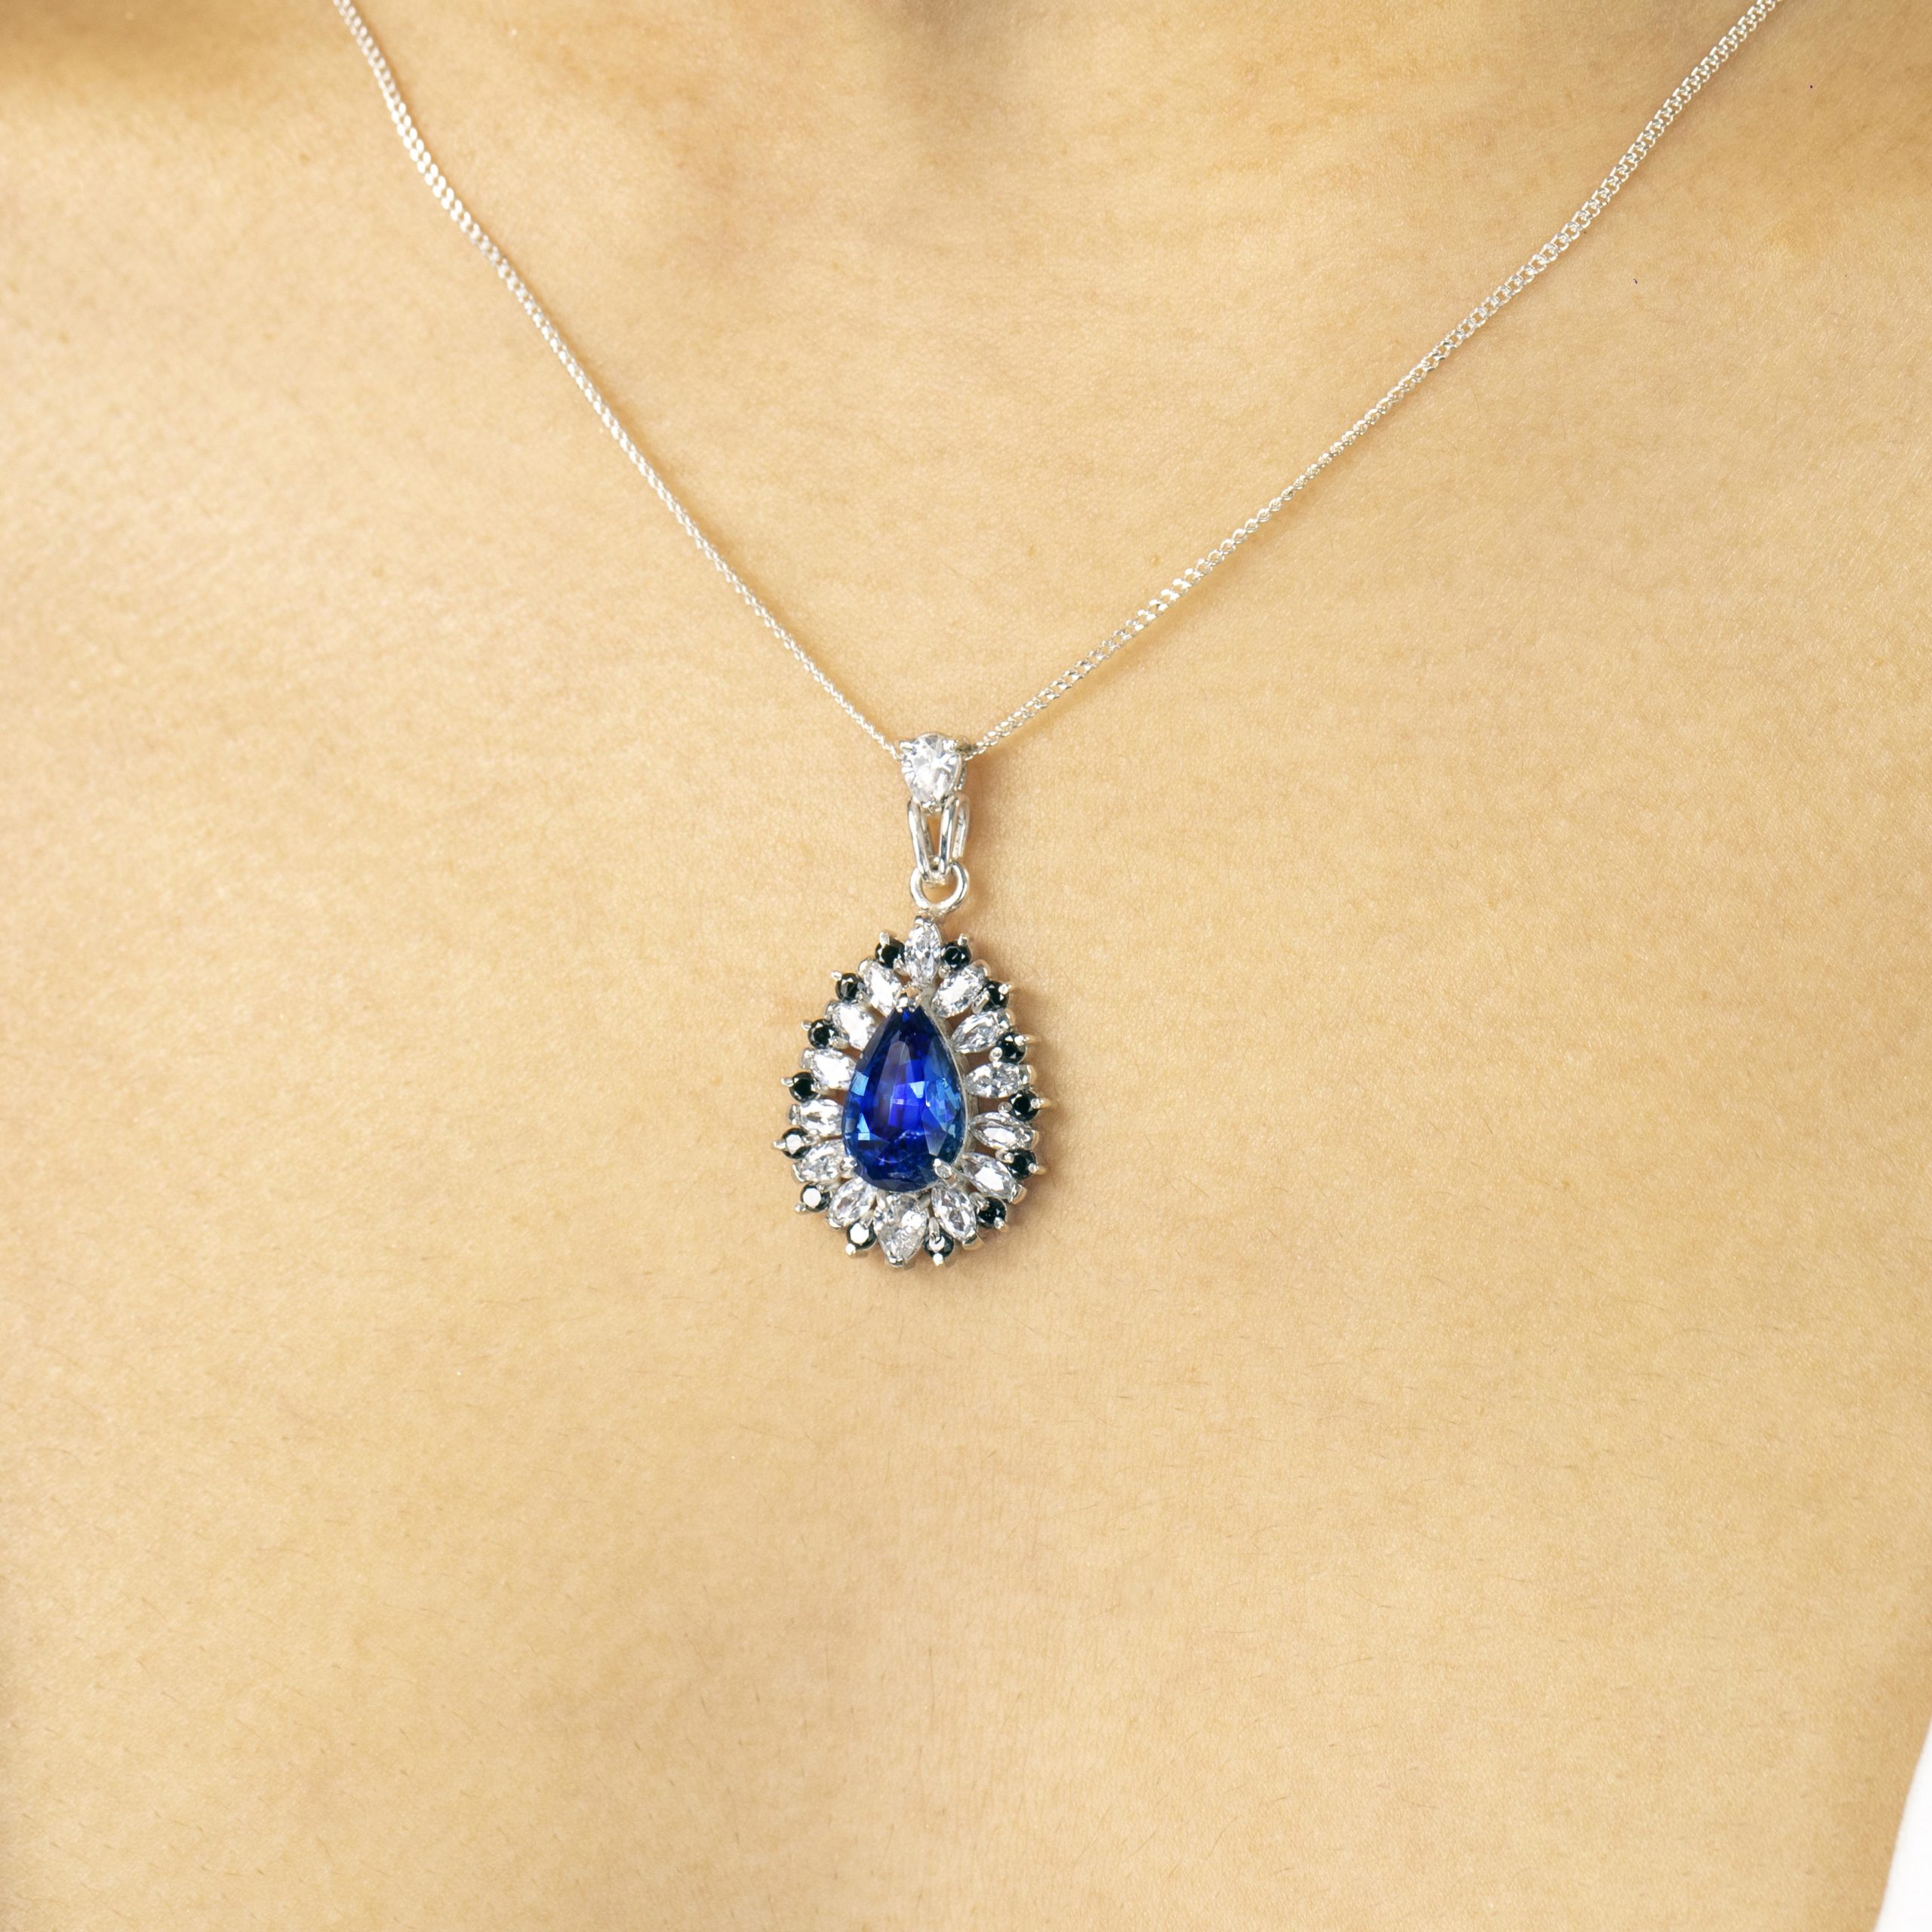 Heavenly Feather Sapphire Necklace